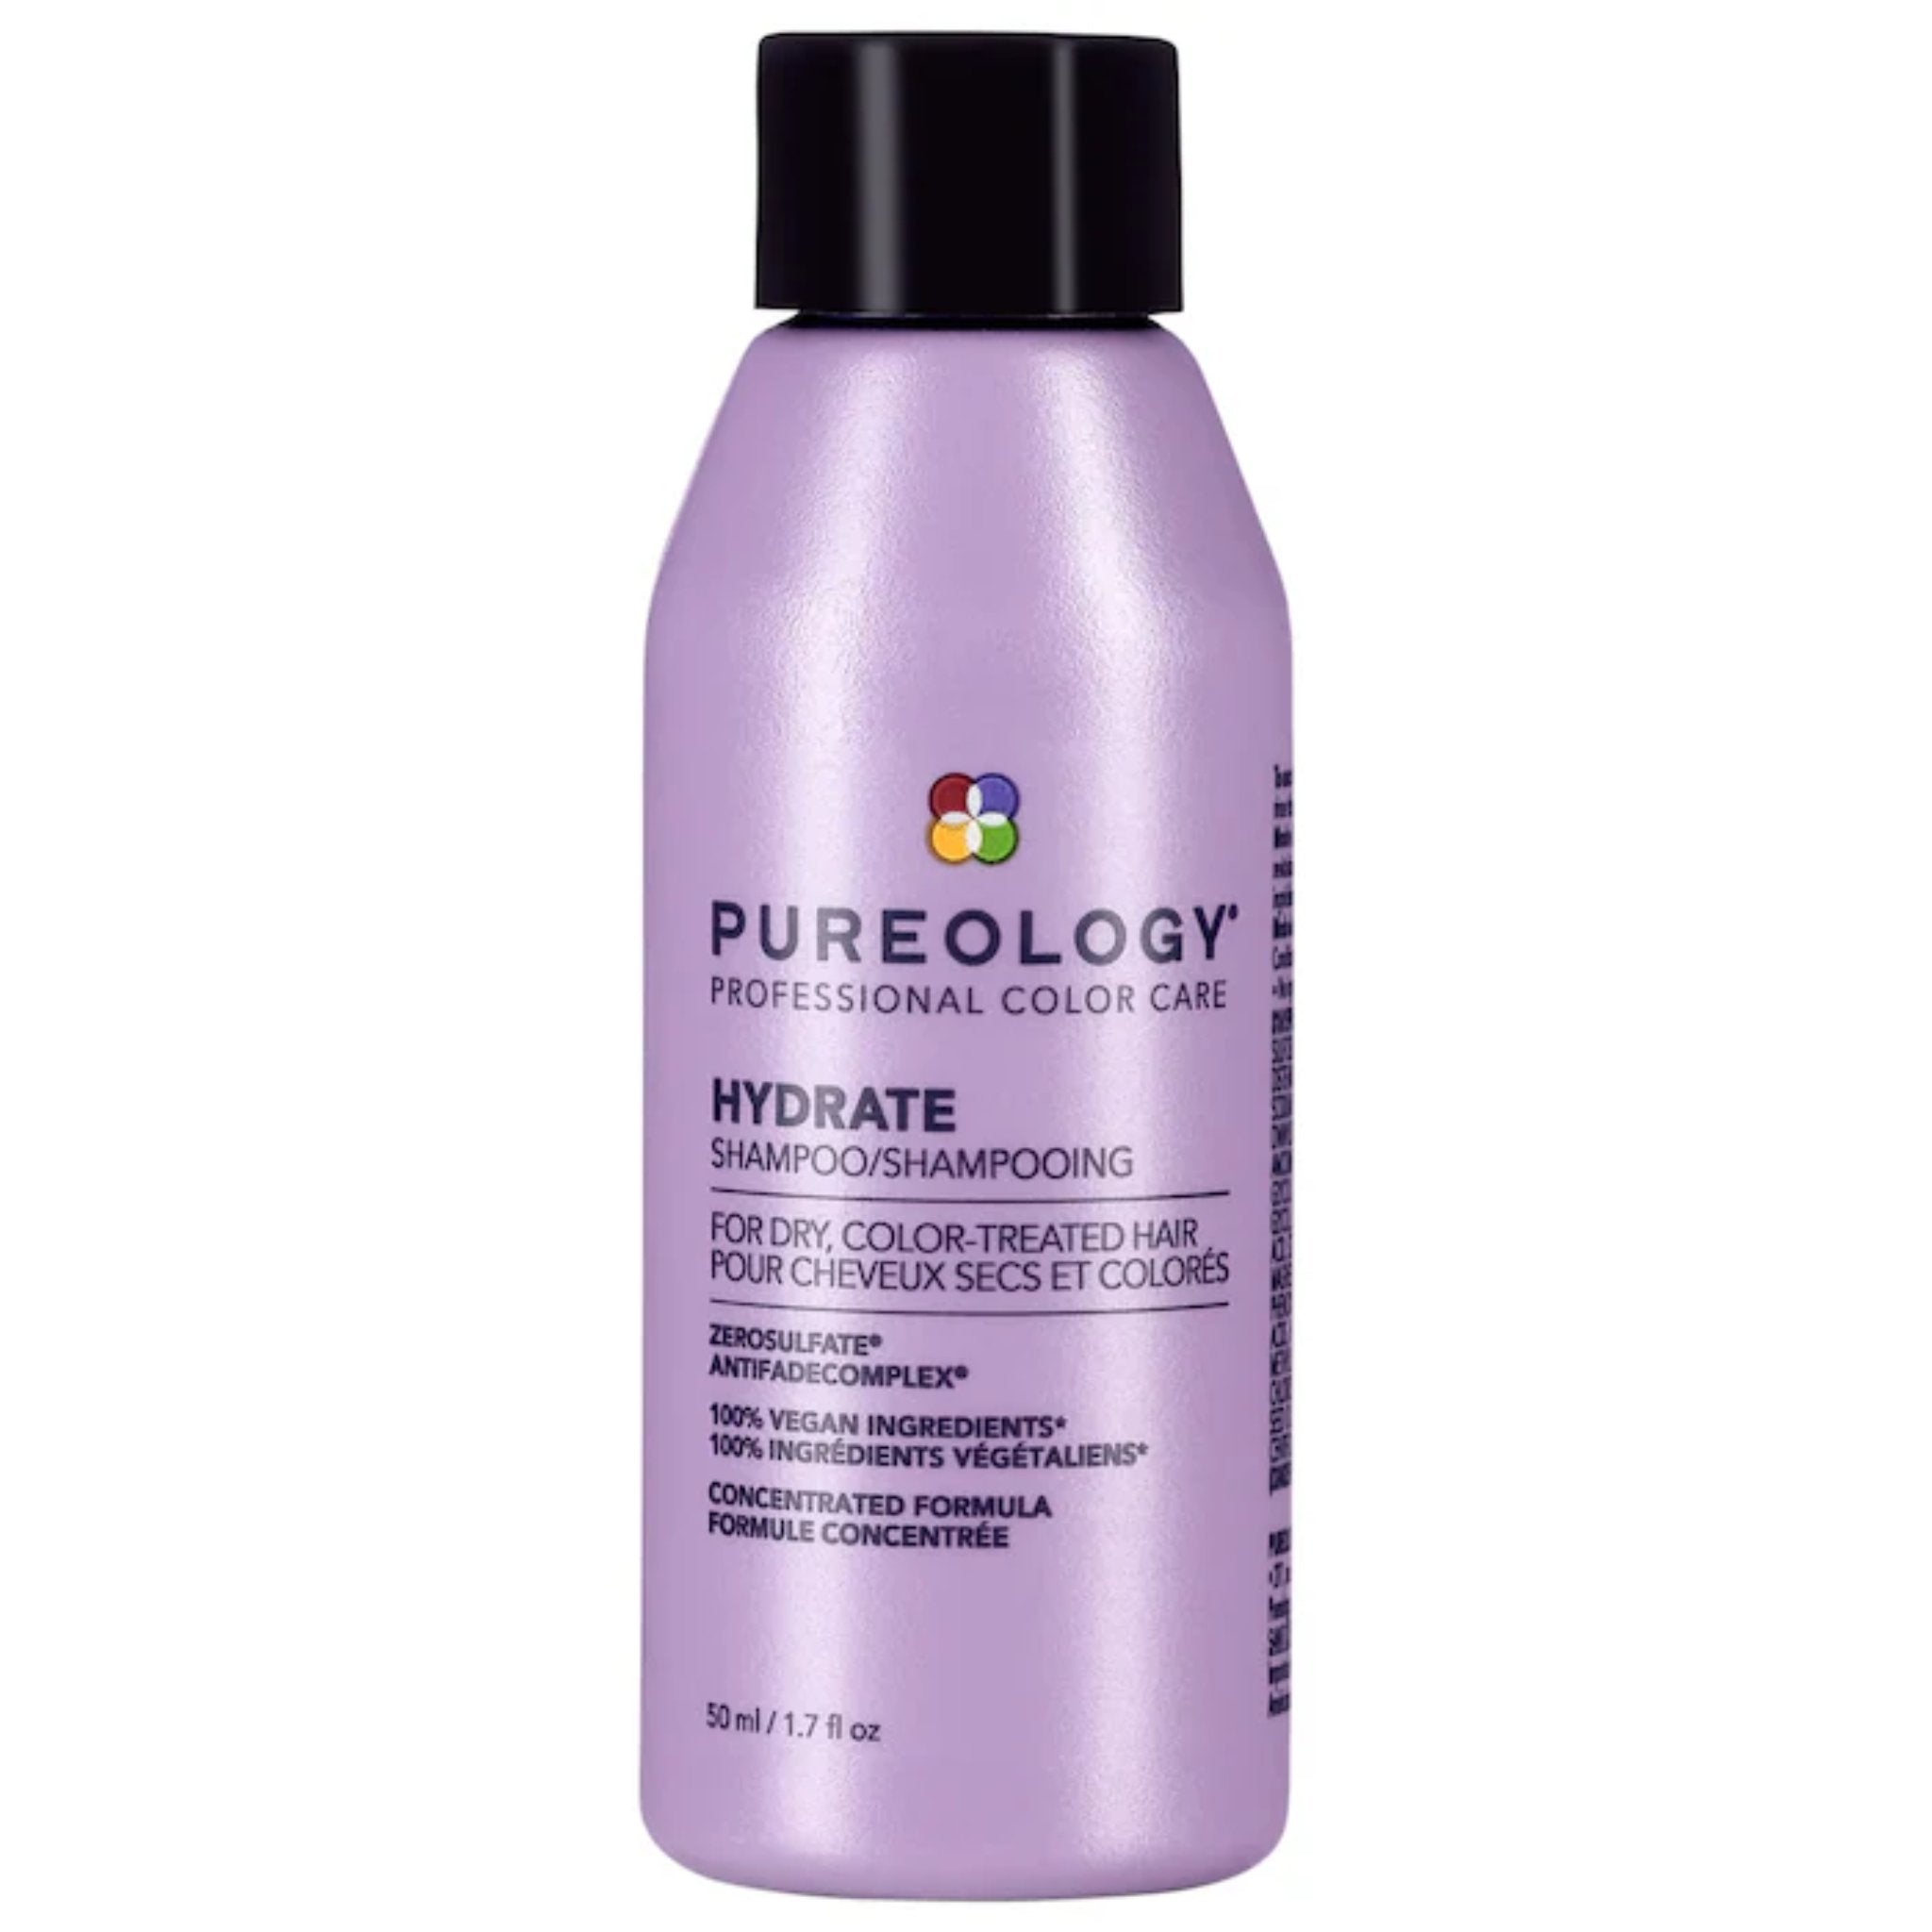 Pureology. Shampoing Hydrate - 50 ml - Concept C. Shop